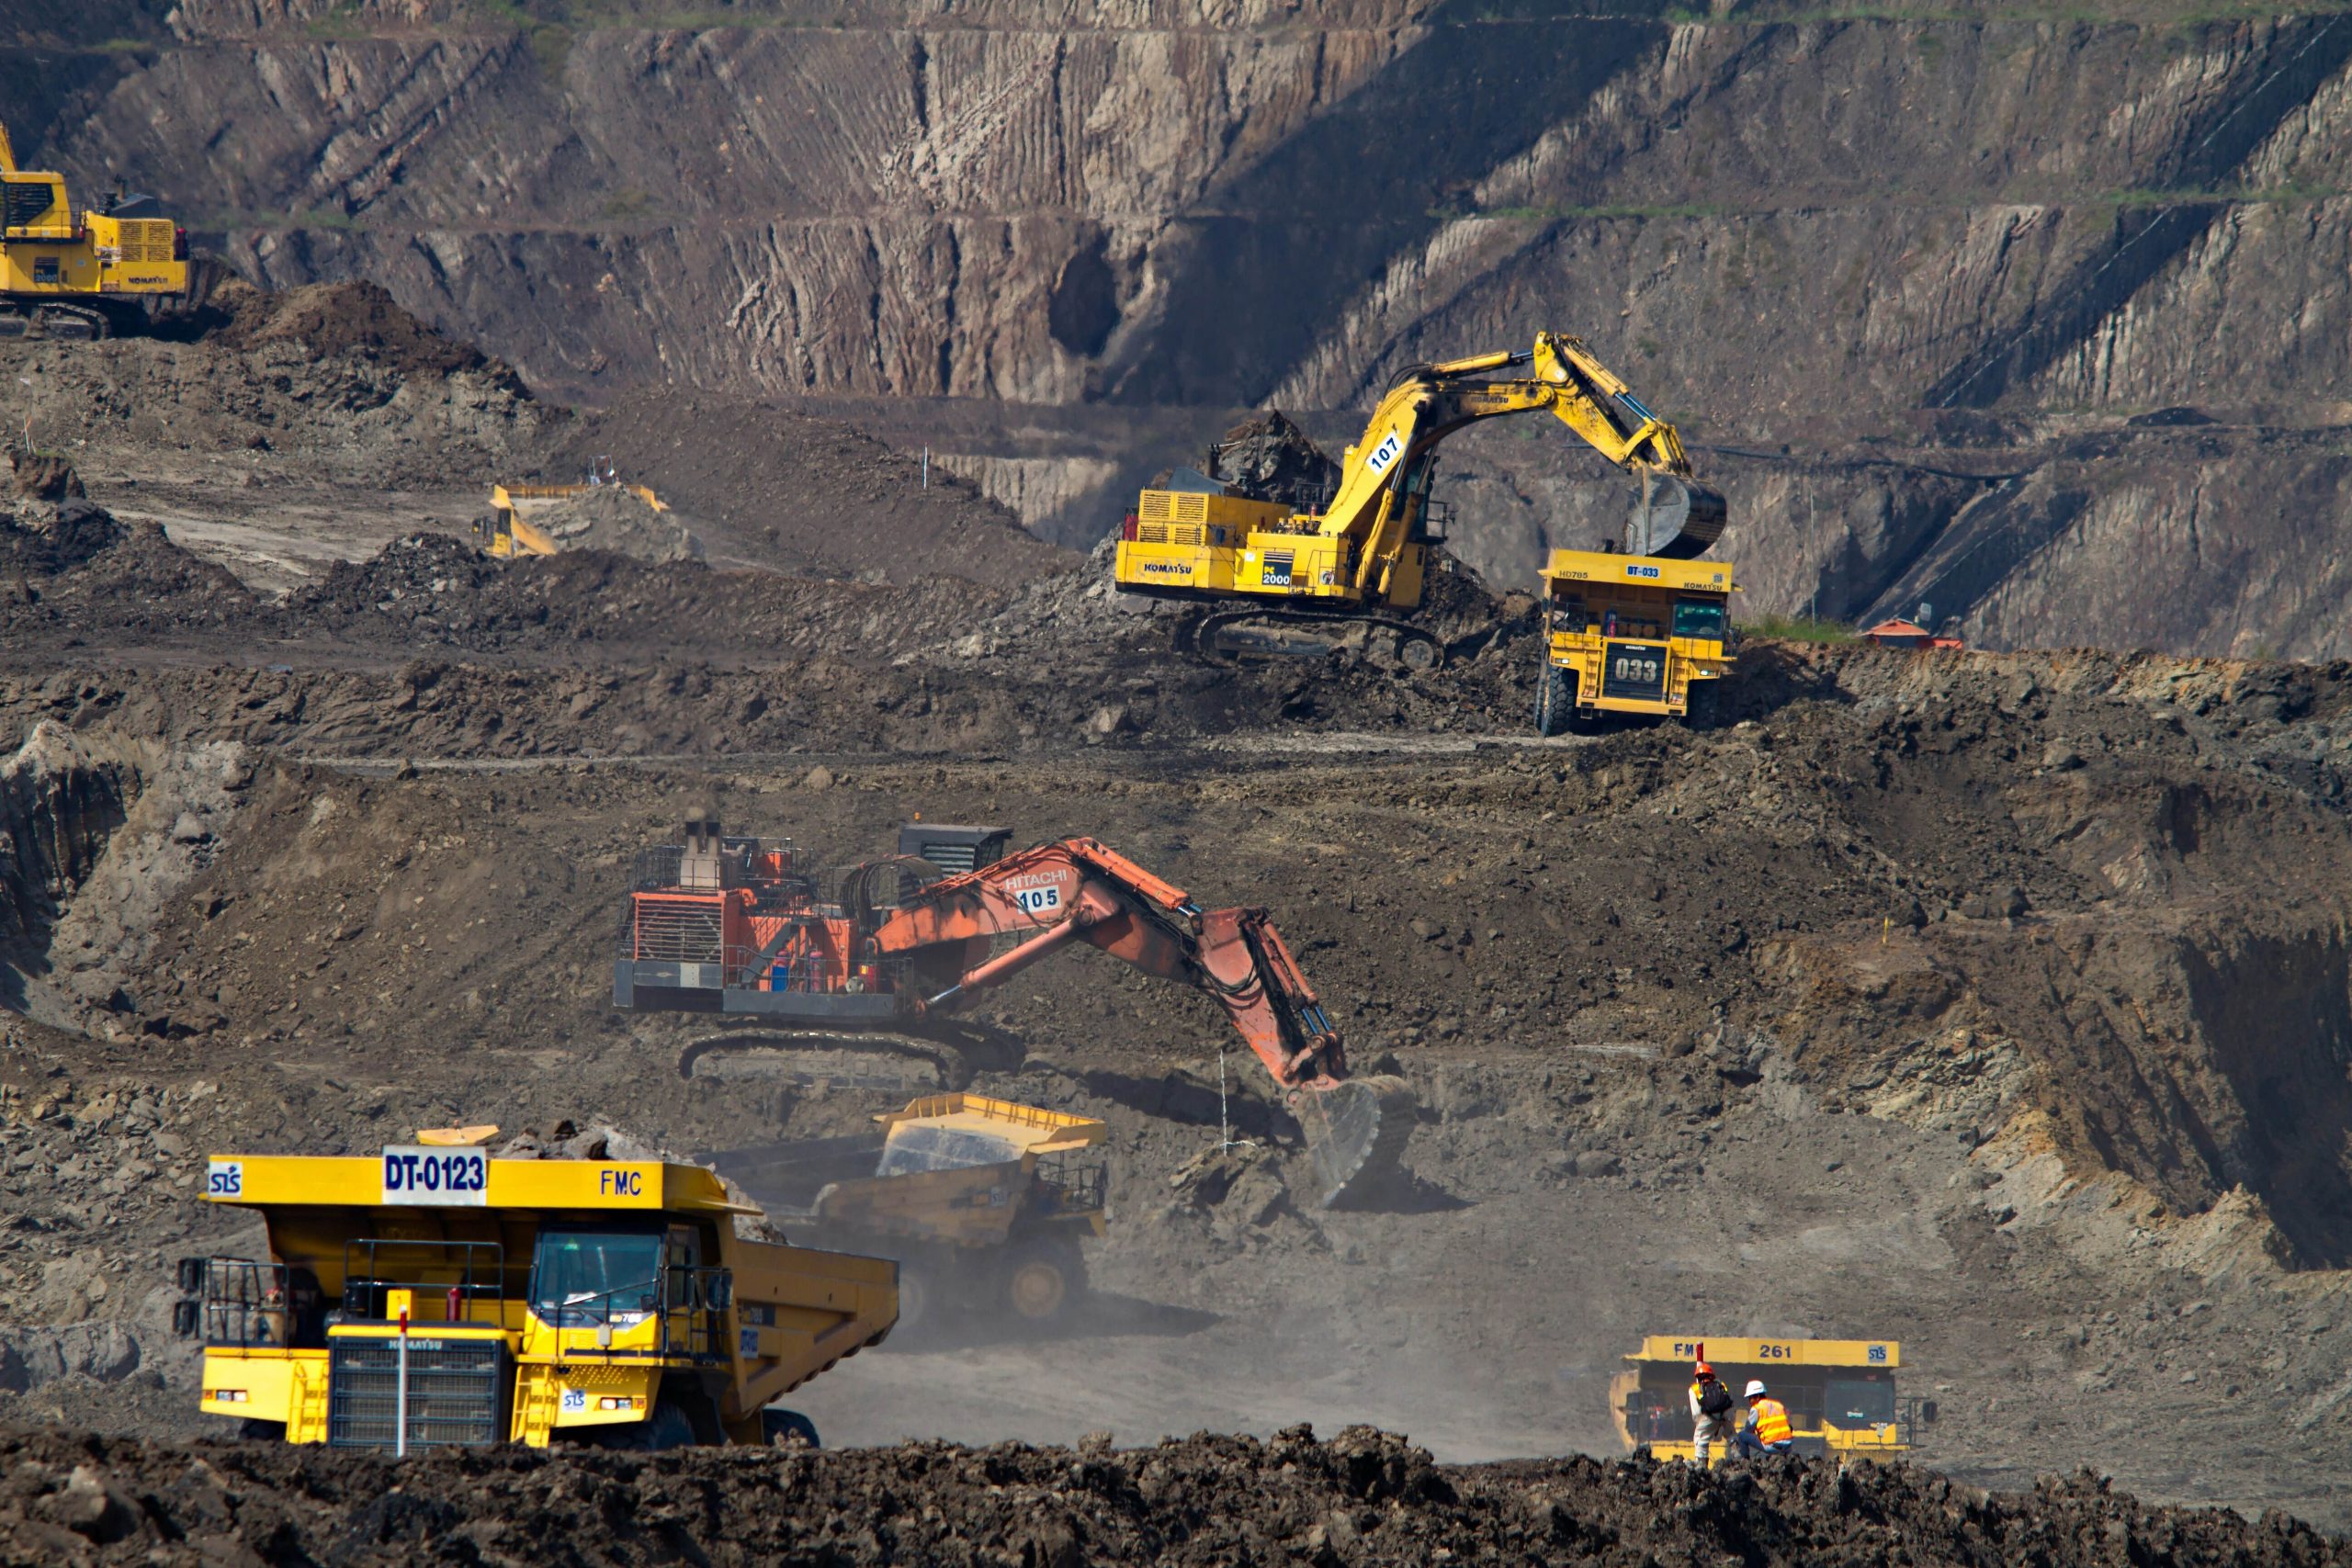 Image showing a number of cranes excavating land for mining